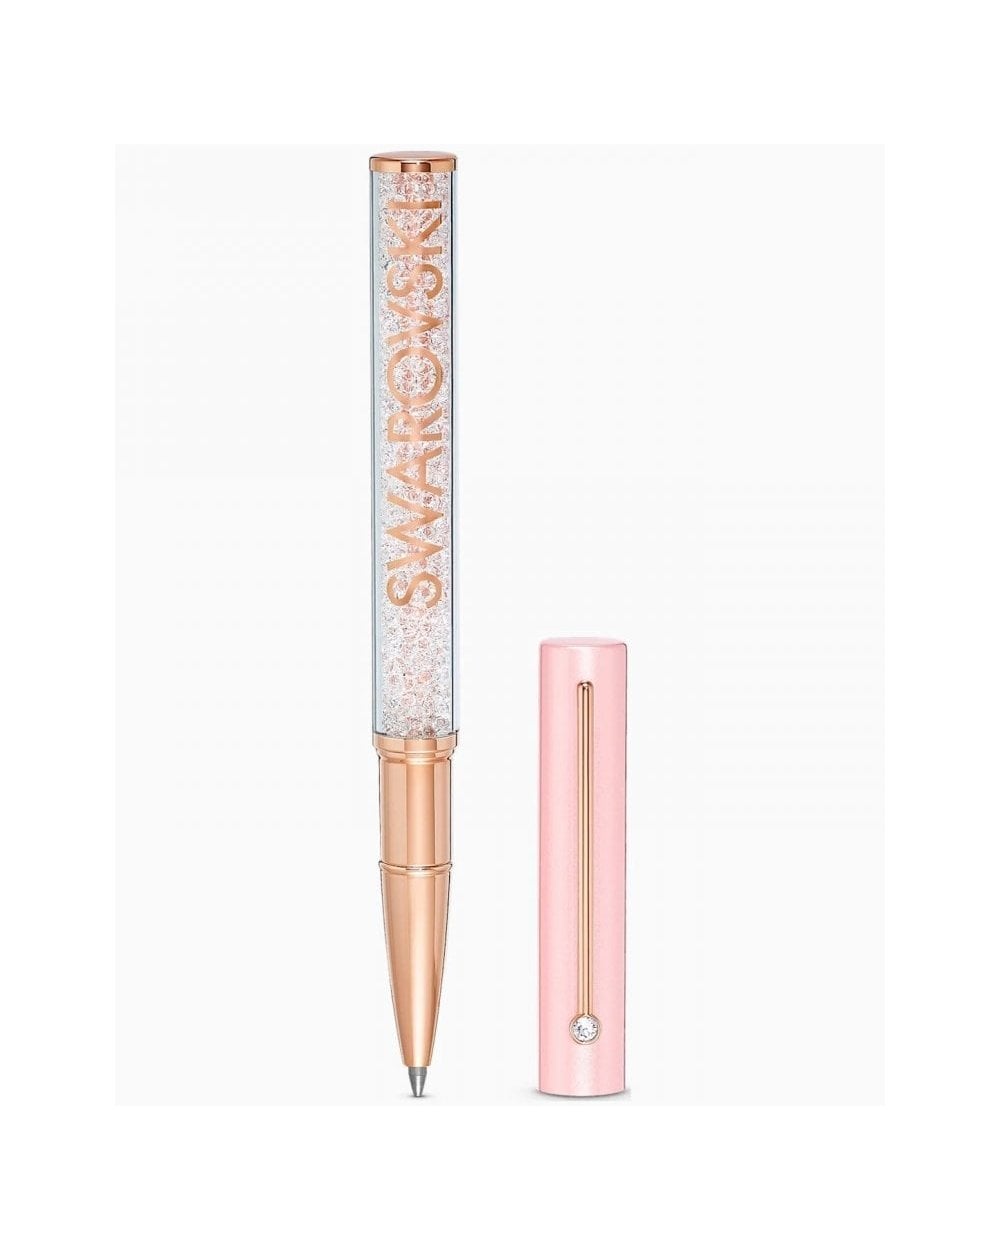 Crystalline Gloss Ballpoint Pen, Pink, Rose-Gold Tone Plated